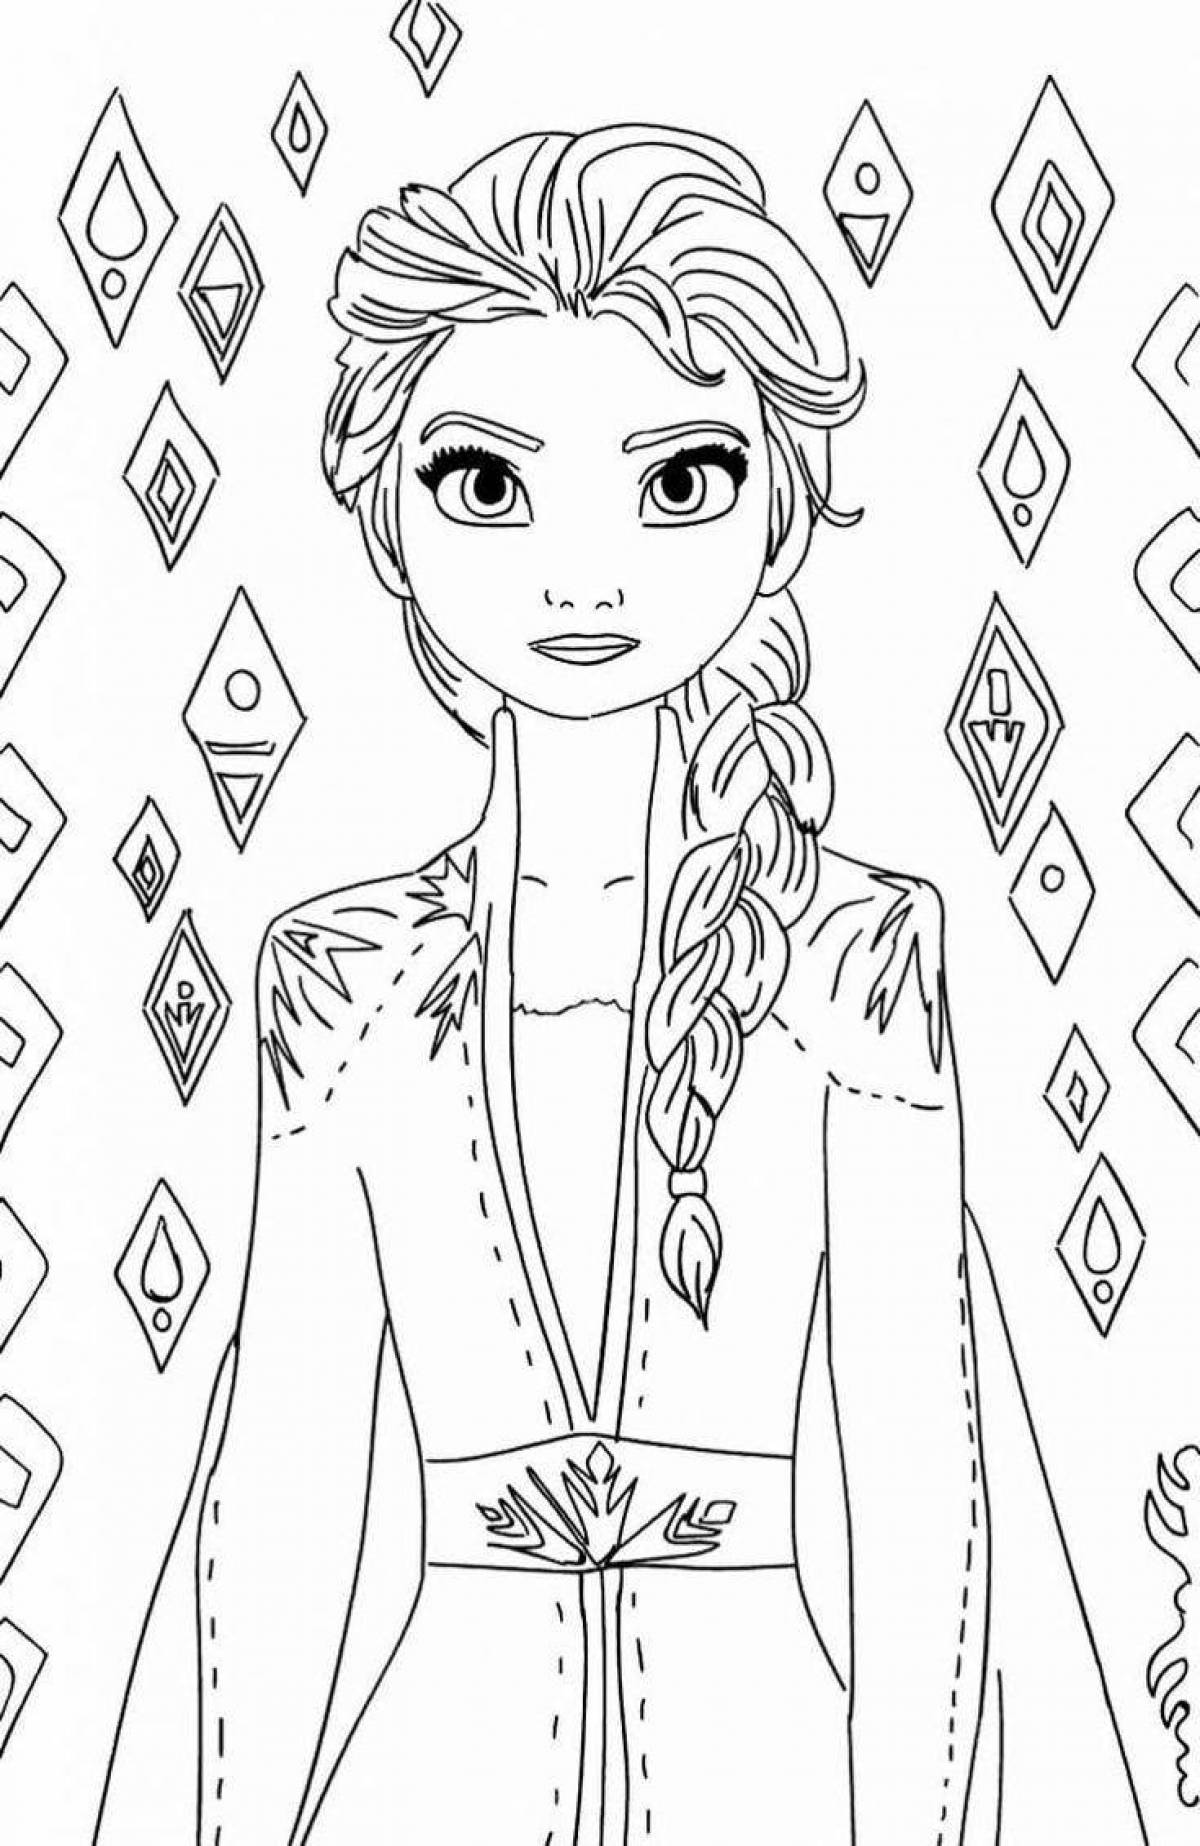 Elsa gorgeous coloring game for girls